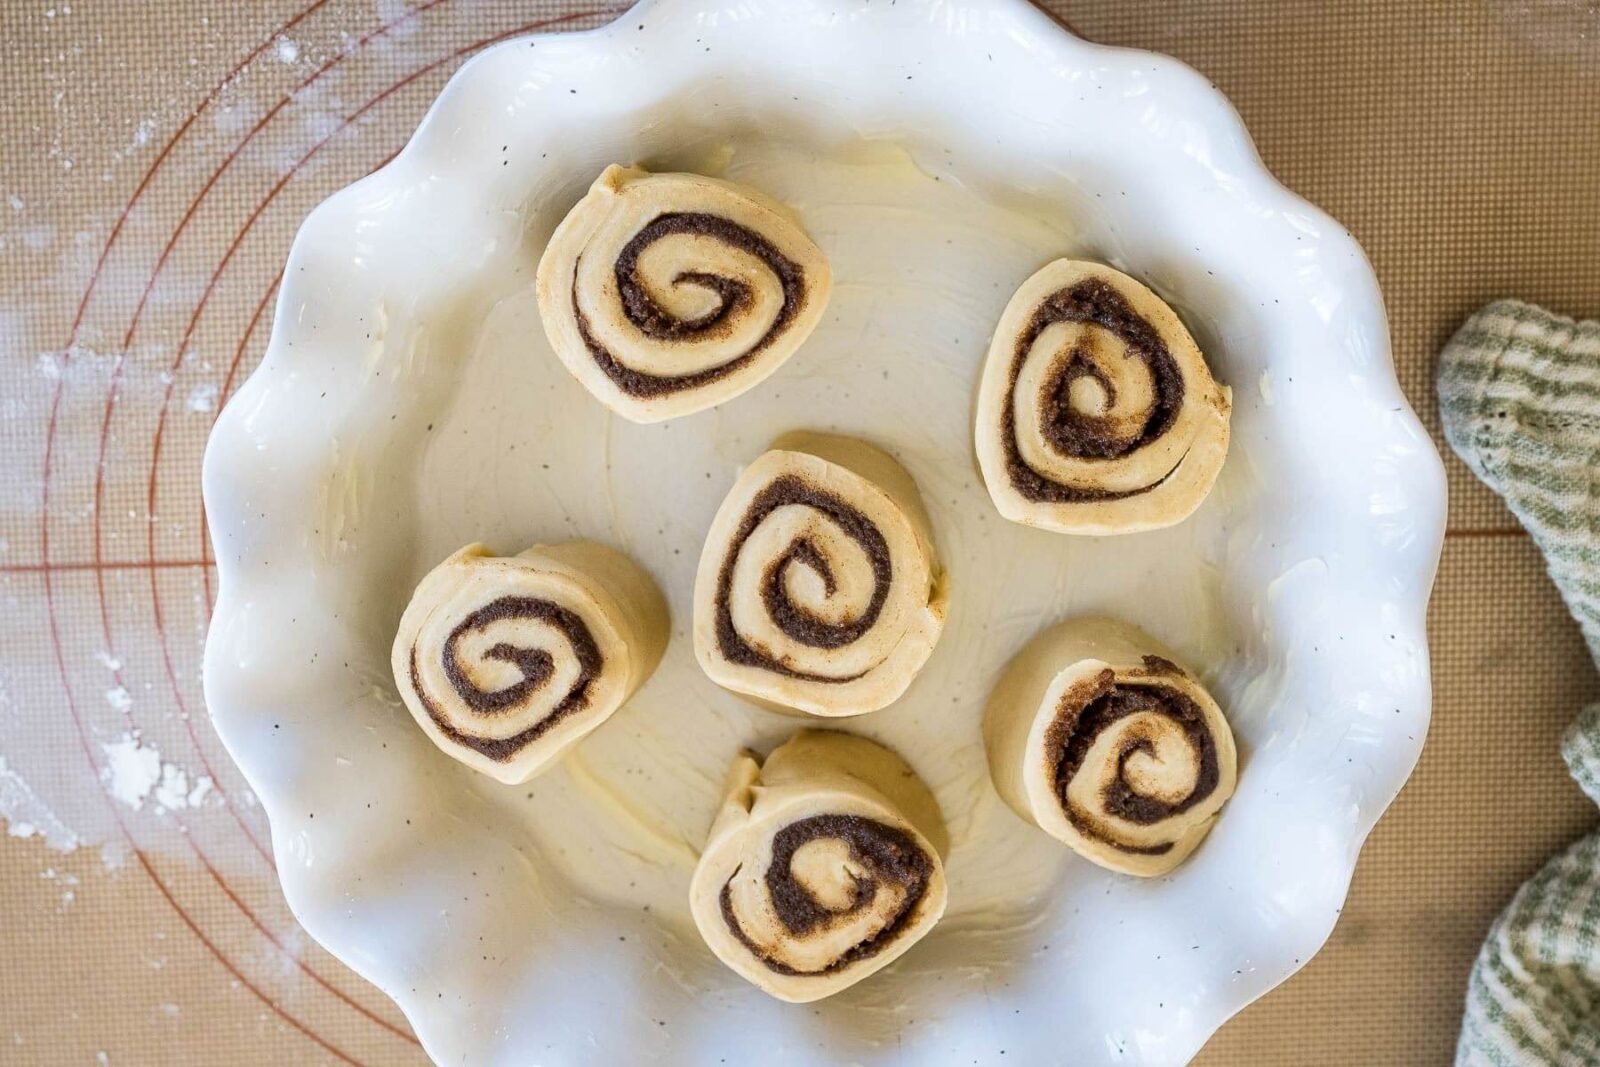 Unbaked, unrisen rolls with dark cinnamon swirls are placed a few inches from each other in a white wavy serving dish.